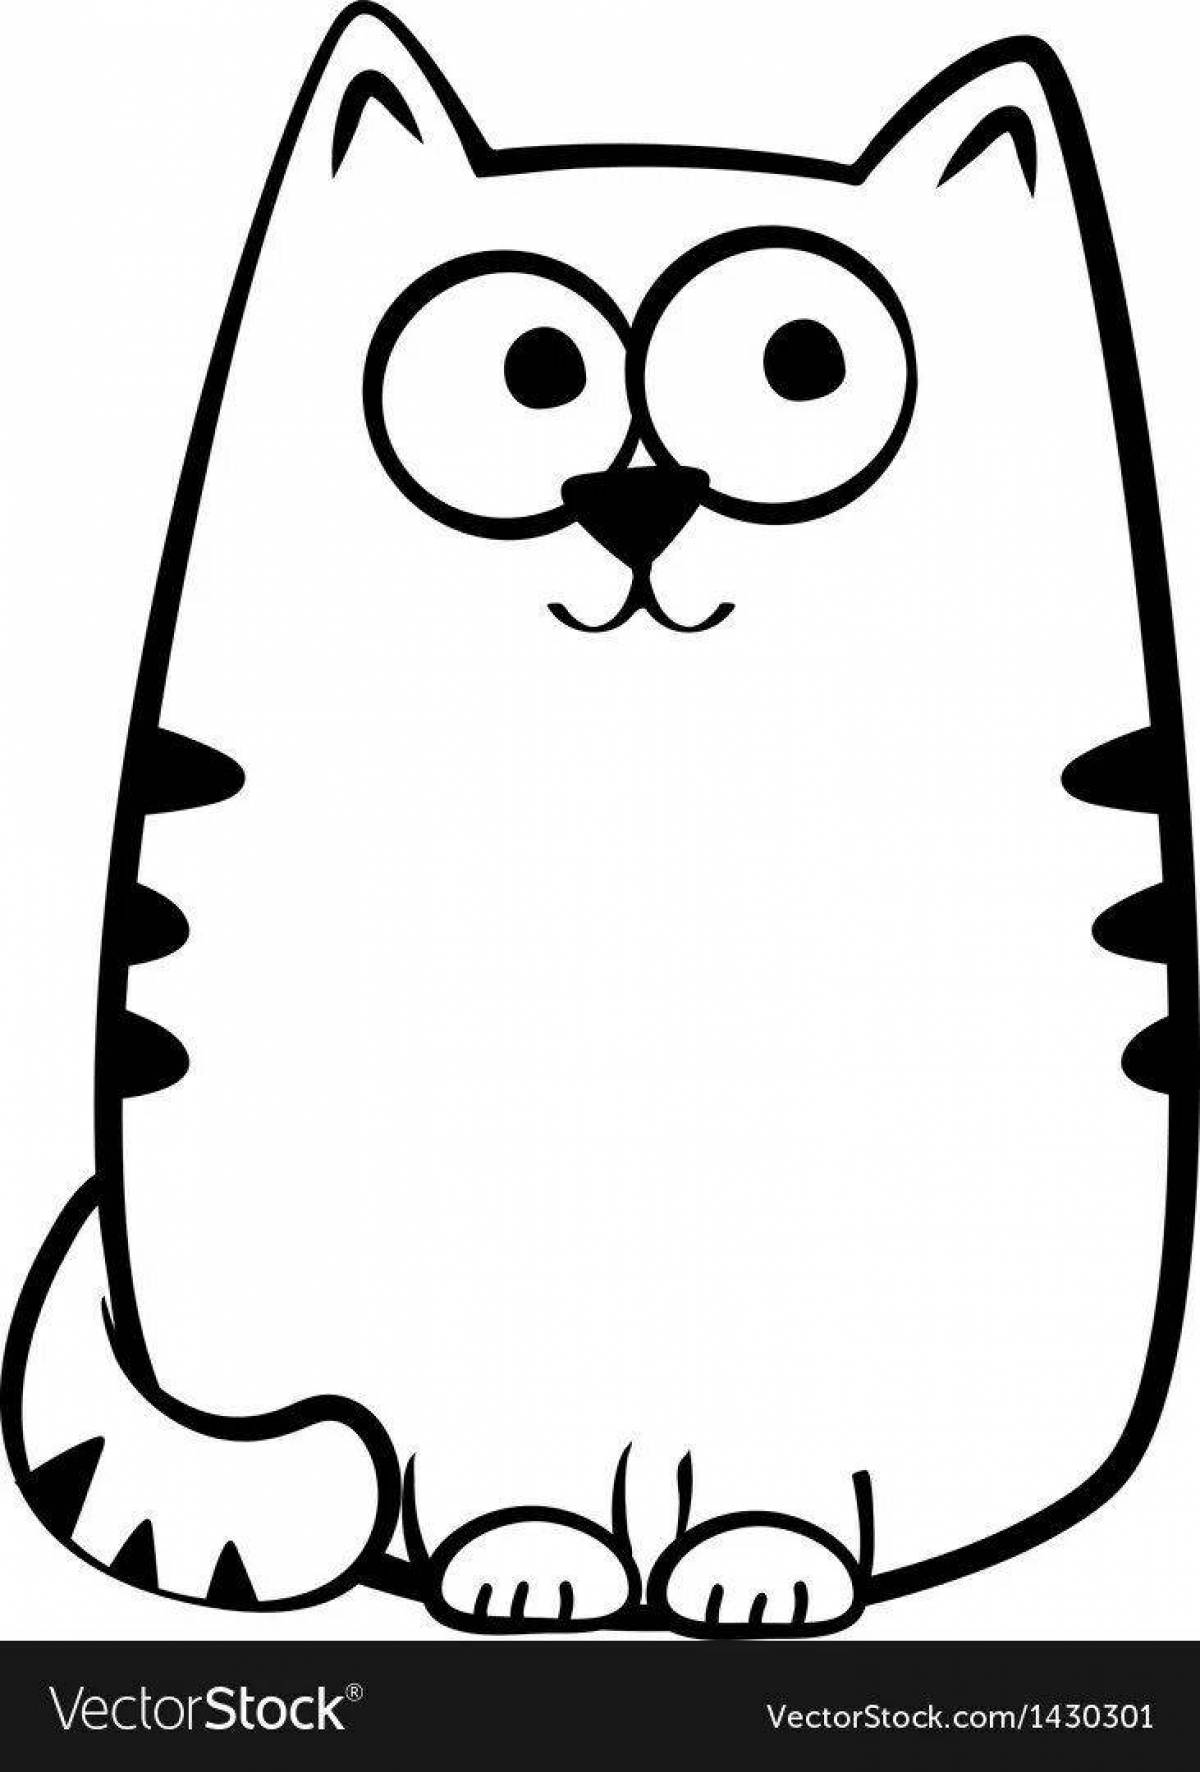 Witty square cat coloring page